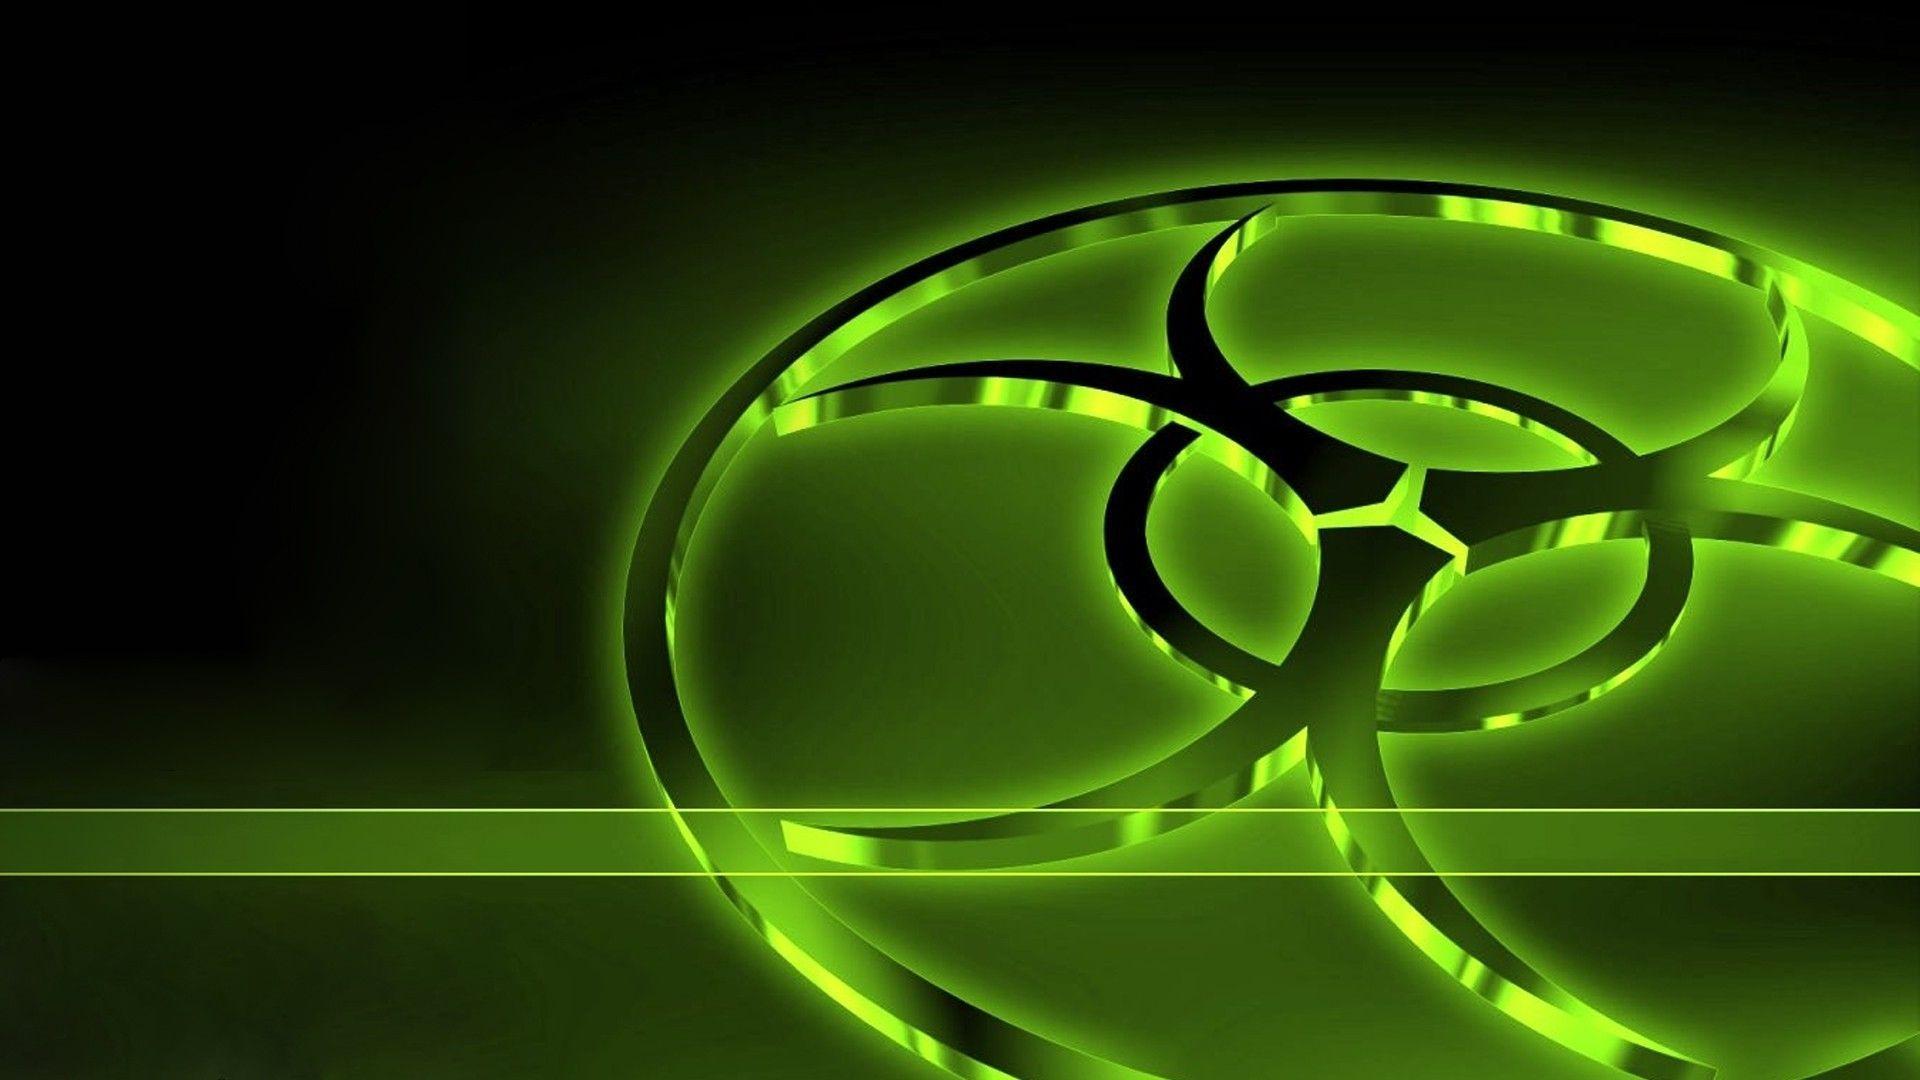 neon green wallpaper - Image And Wallpaper free to download